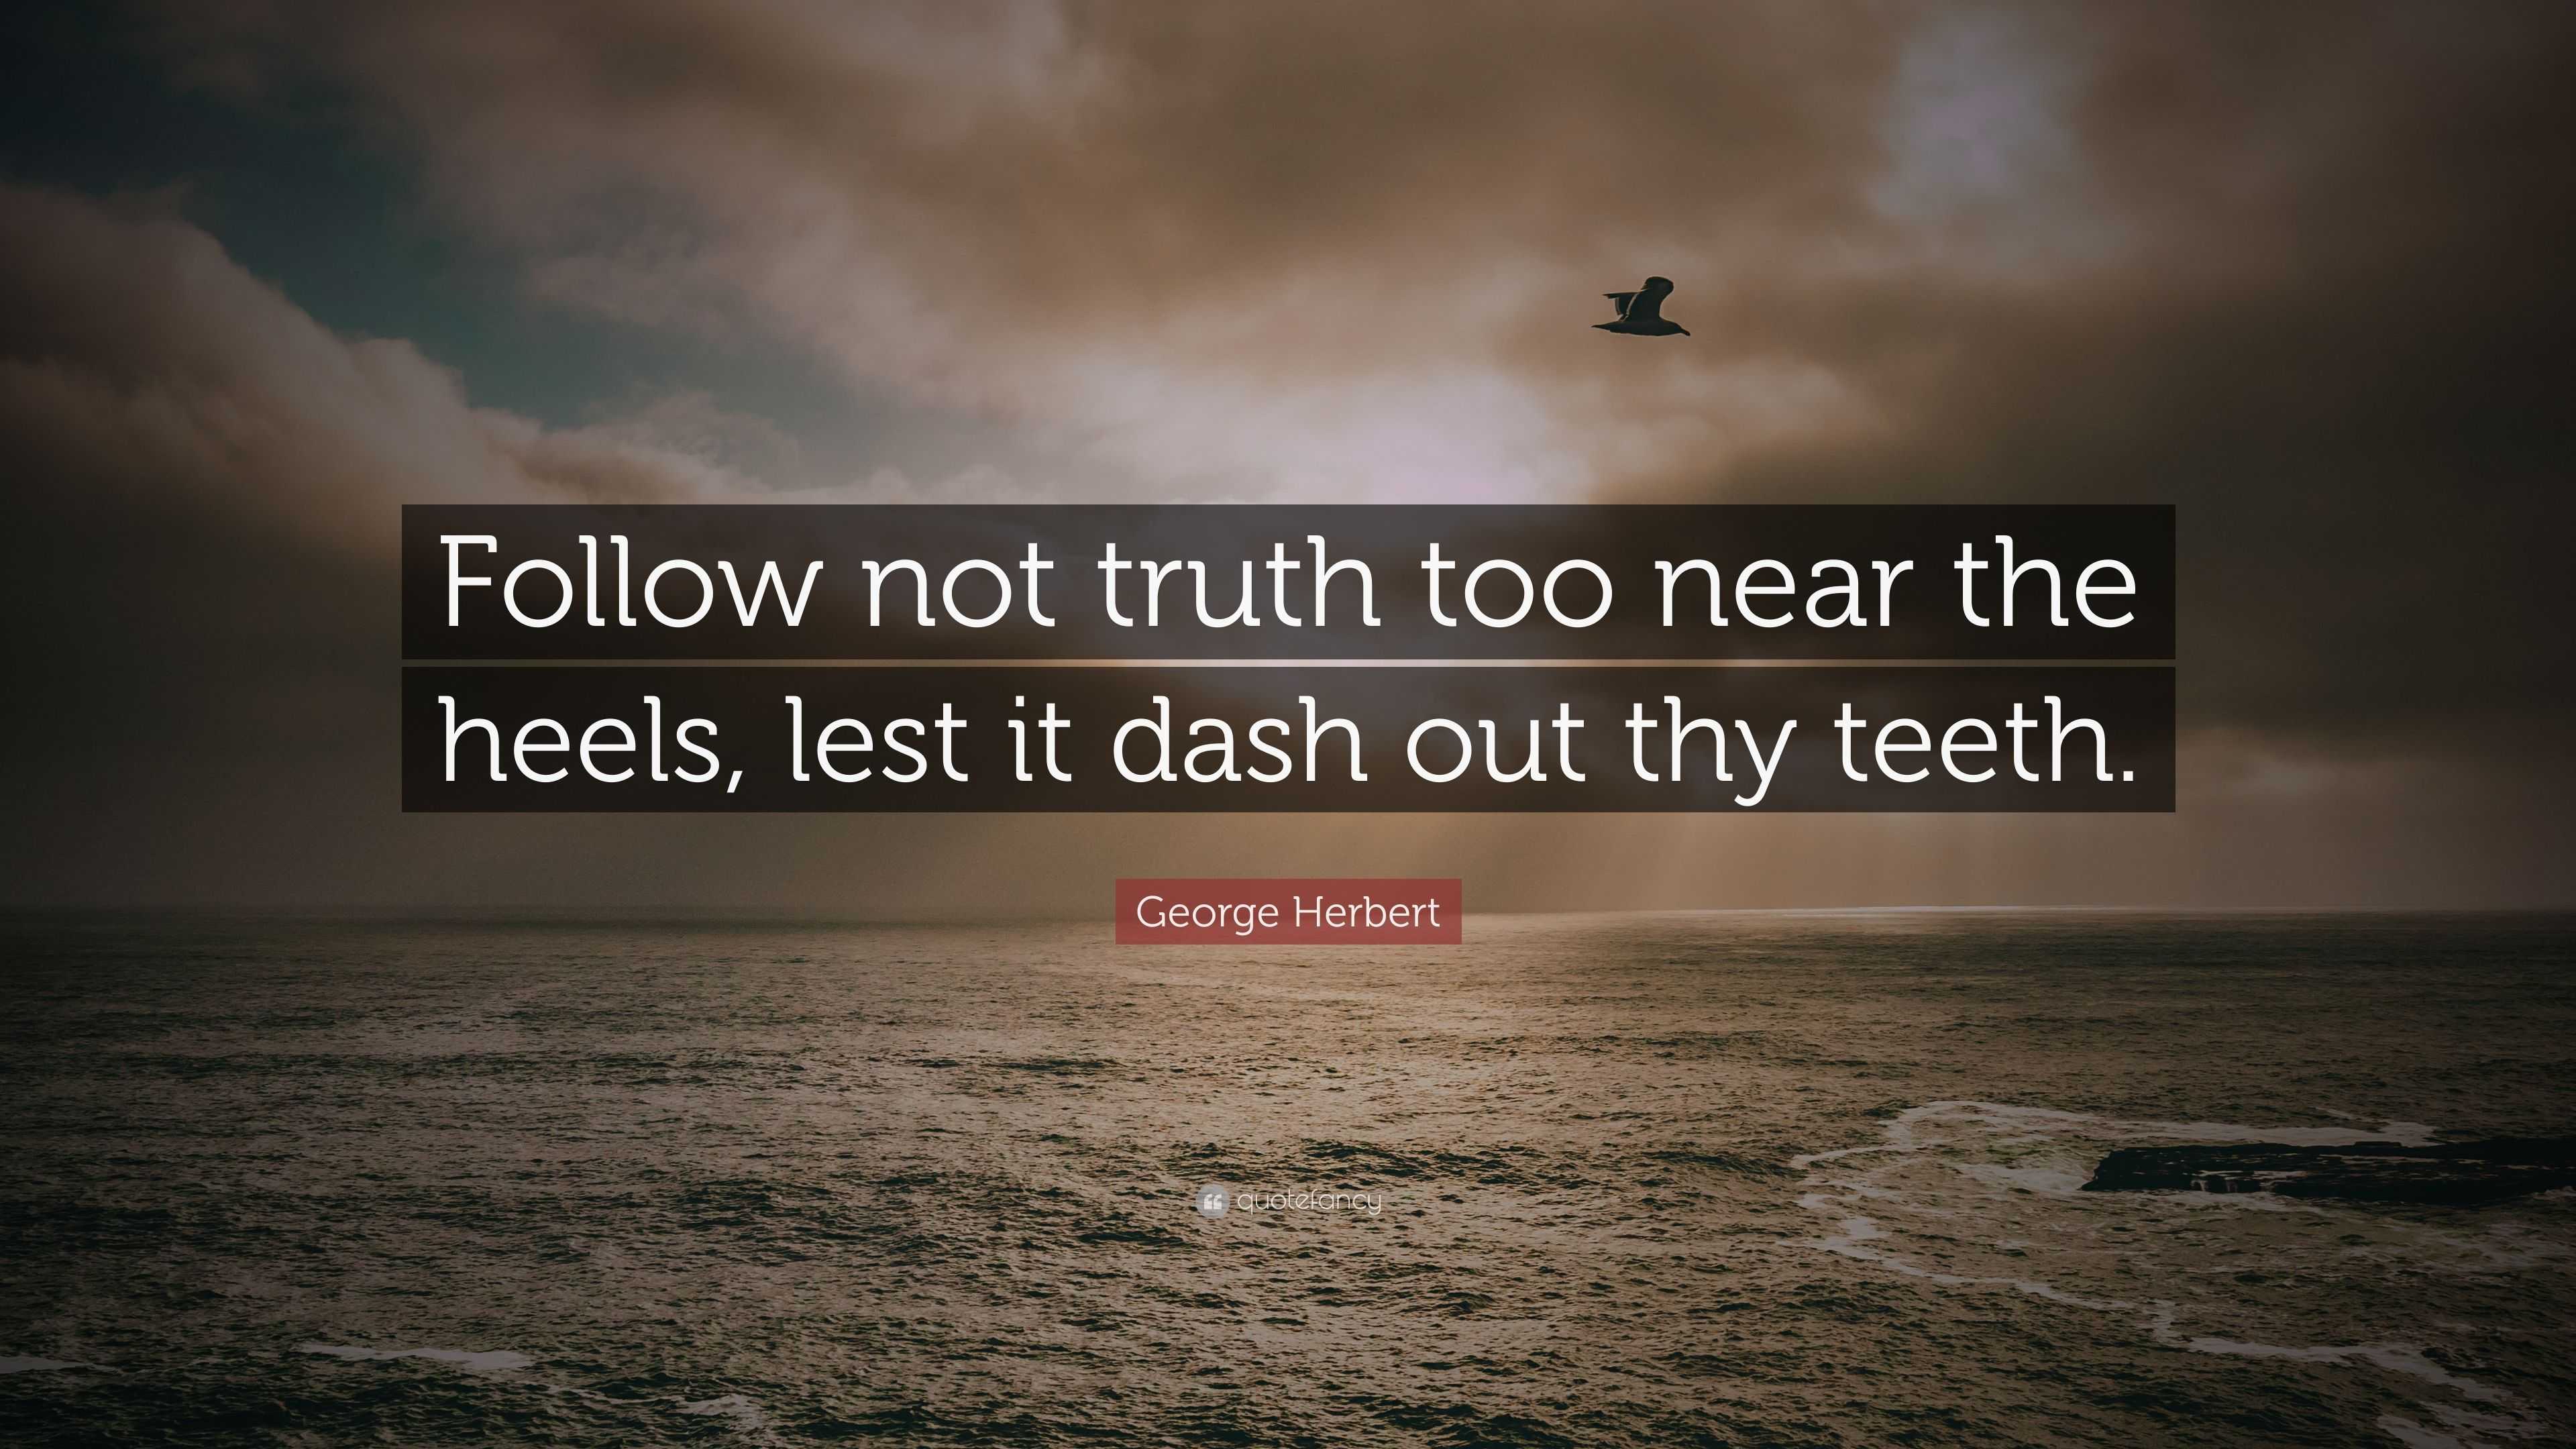 George Herbert Quote Follow Not Truth Too Near The Heels Lest It Dash Out Thy Teeth 7 Wallpapers Quotefancy